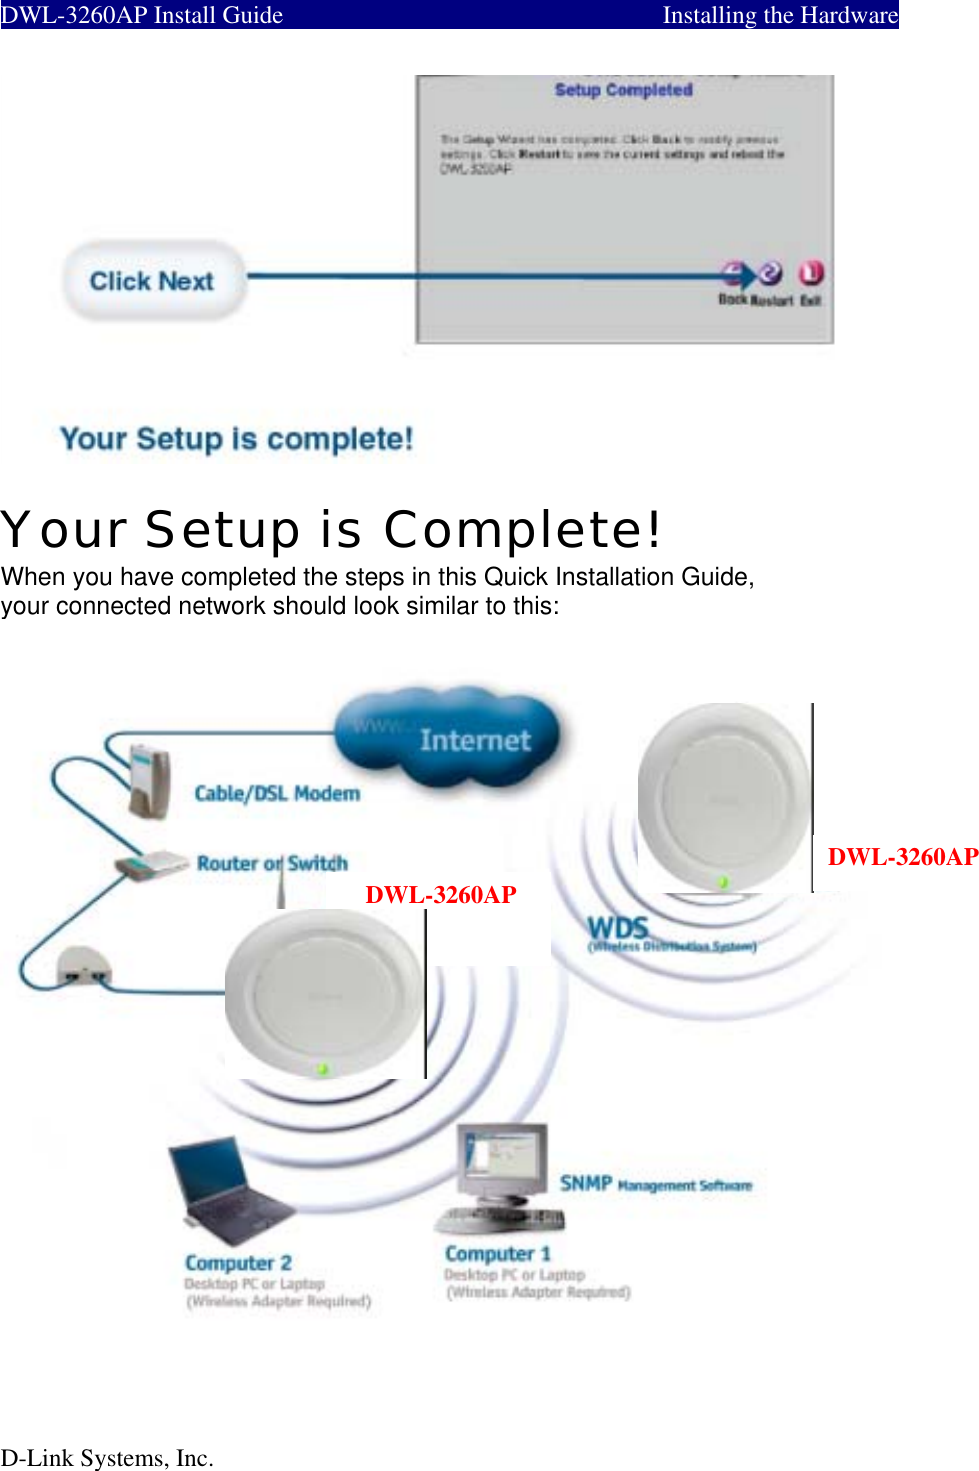  DWL-3260AP Install Guide         Installing the Hardware    Your Setup is Complete! When you have completed the steps in this Quick Installation Guide, your connected network should look similar to this:  DWL-3260APDWL-3260APD-Link Systems, Inc. 